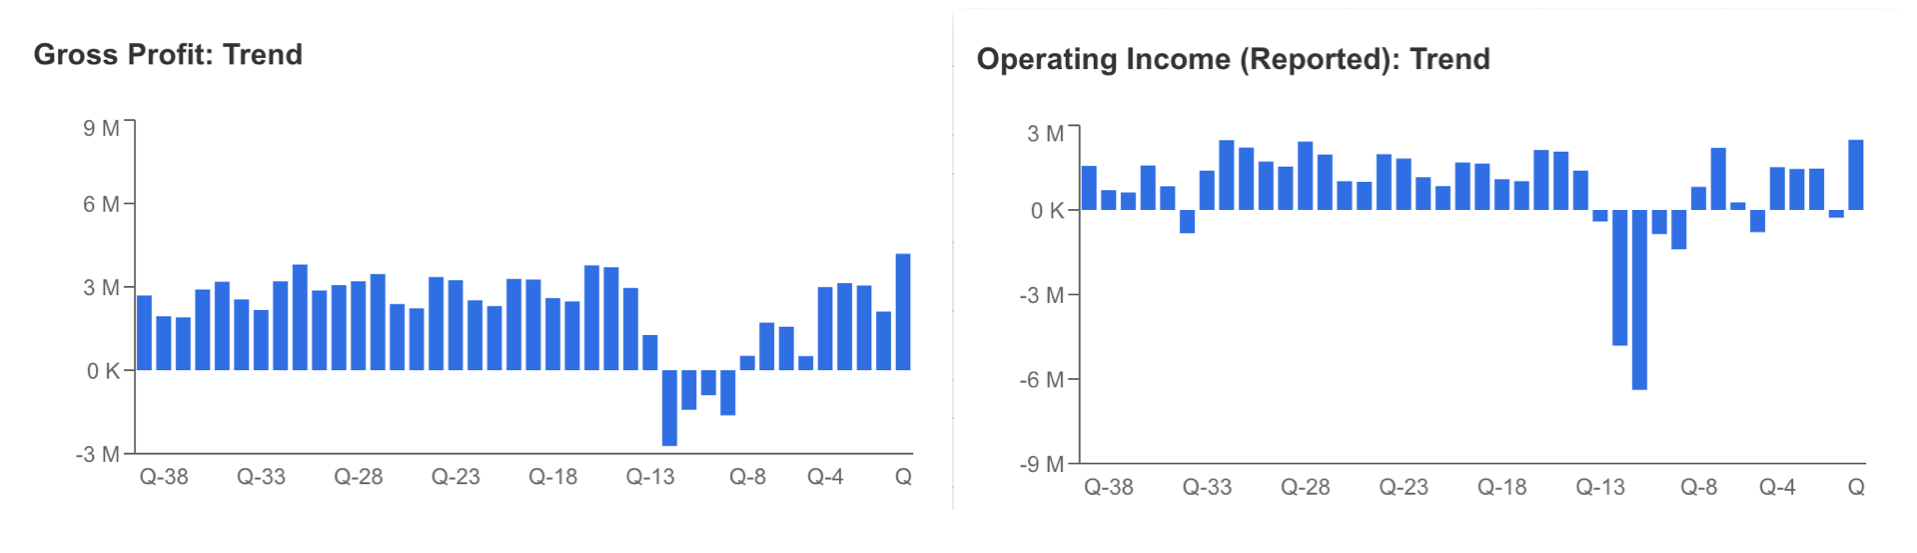 DAL Gross Profit and Operating Income Trend